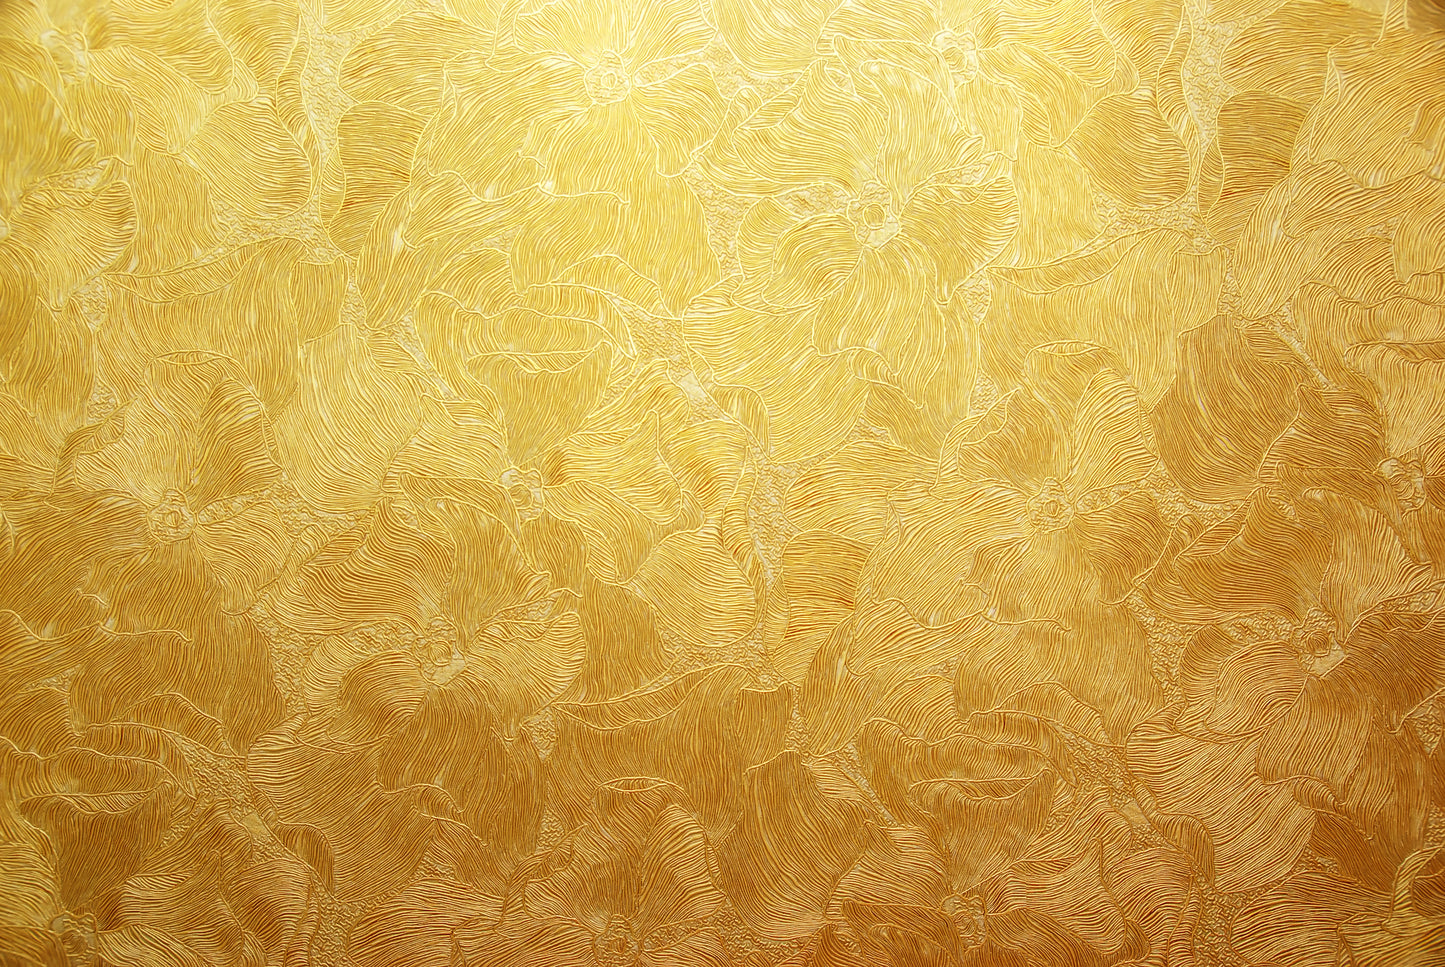 Abstract gold background - wallpaper for wall